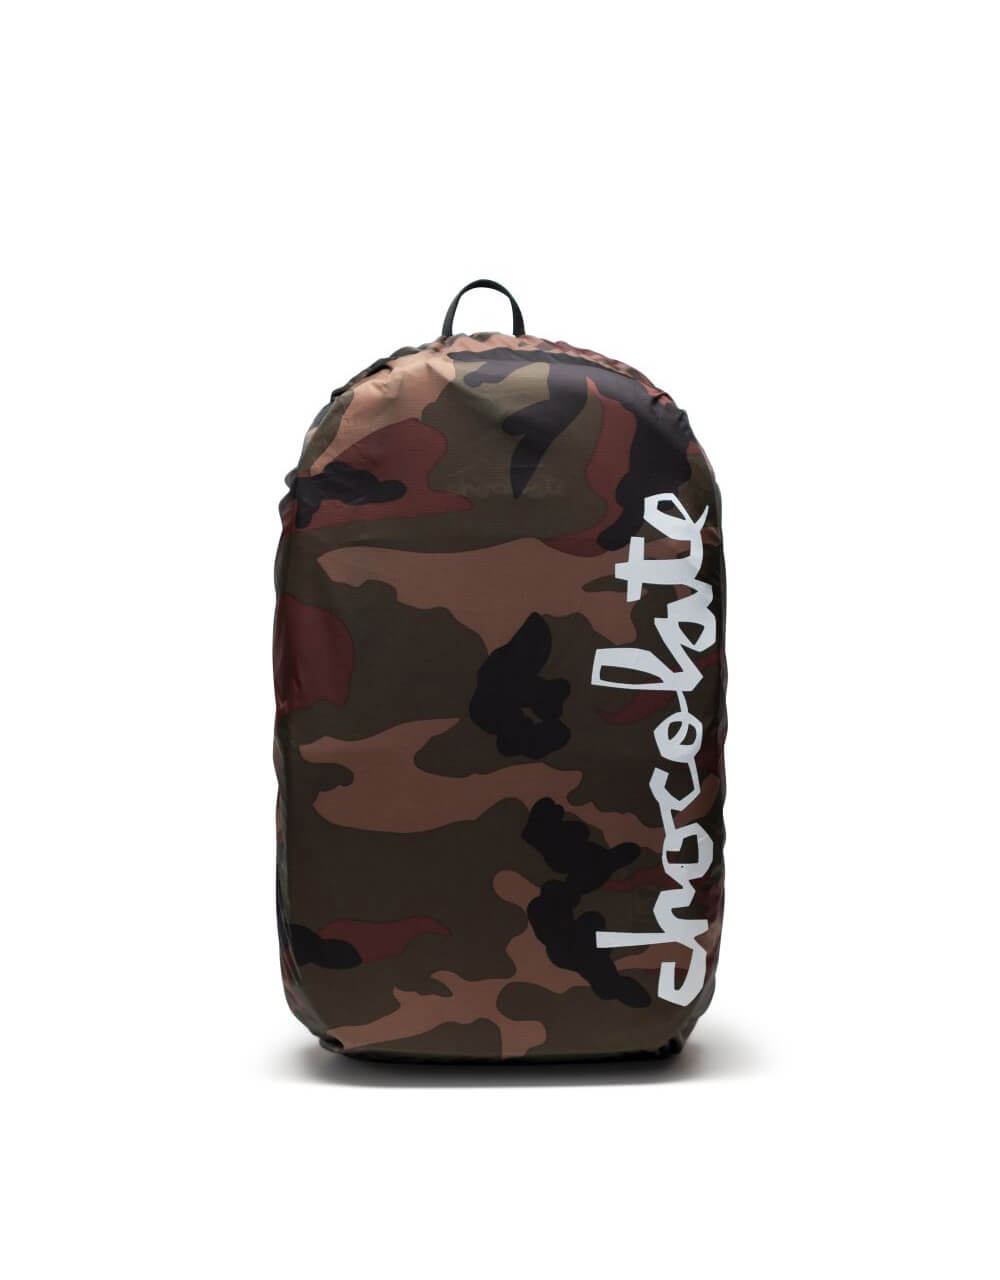 Herschel Supply Co. x Chocolate Mammoth Large Backpack - High Rish Red